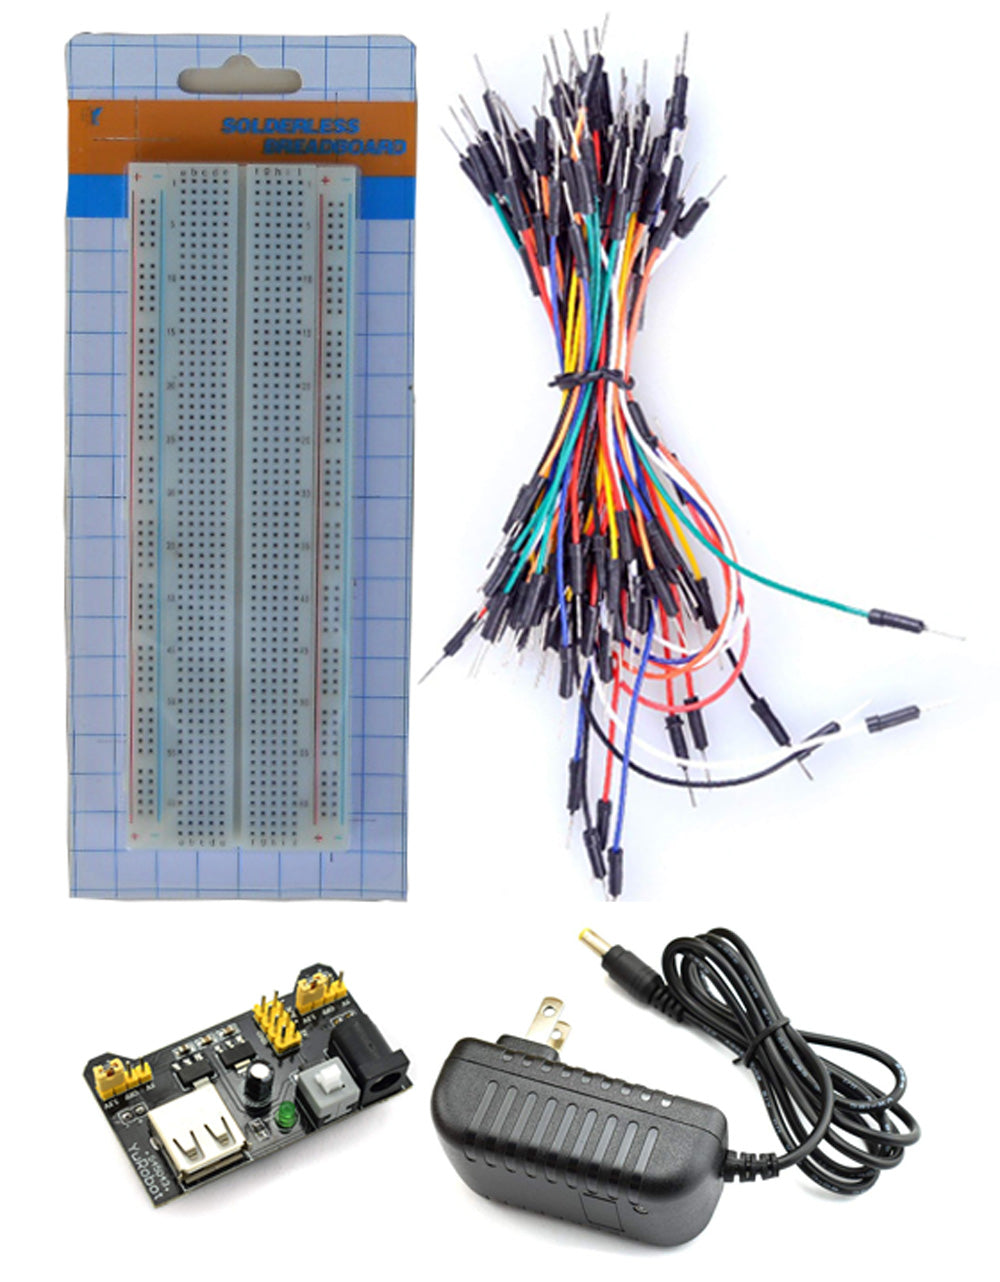 Tektrum Solderless 830 Tie-Points Experiment Plug-in Breadboard Kit with Jumper Wires, Power Module, AC Wall Adapter for Proto-Typing Circuit